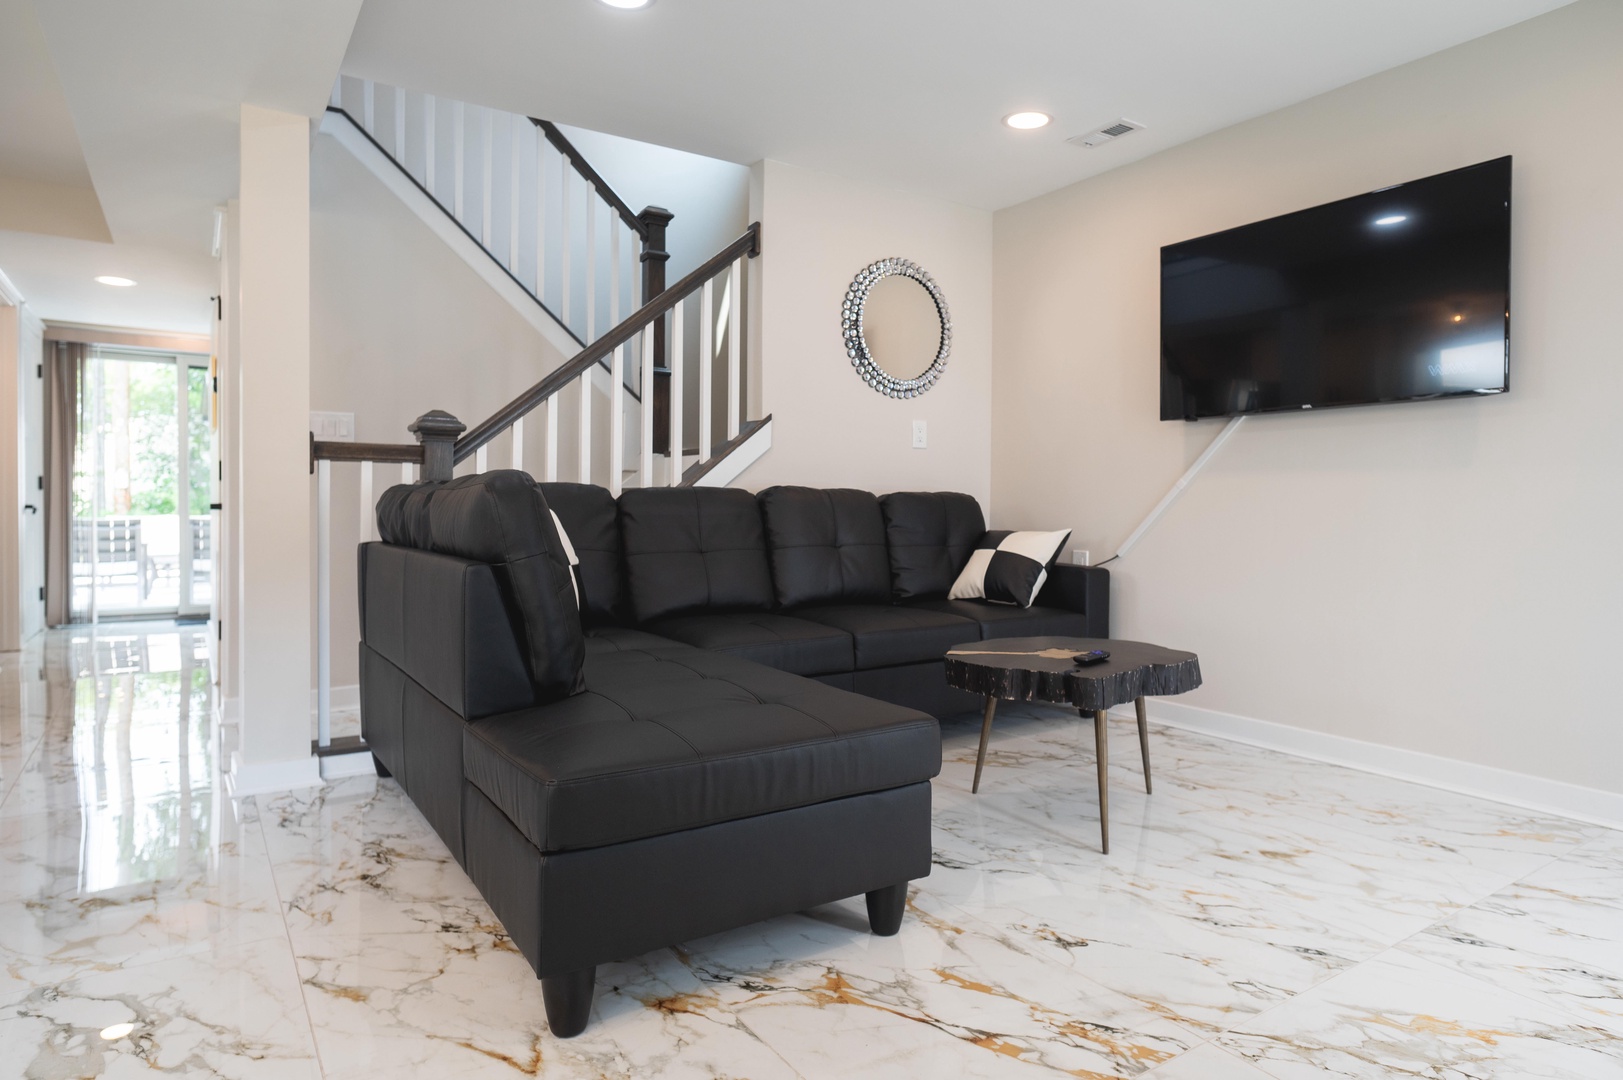 Comfortable seating in the living area